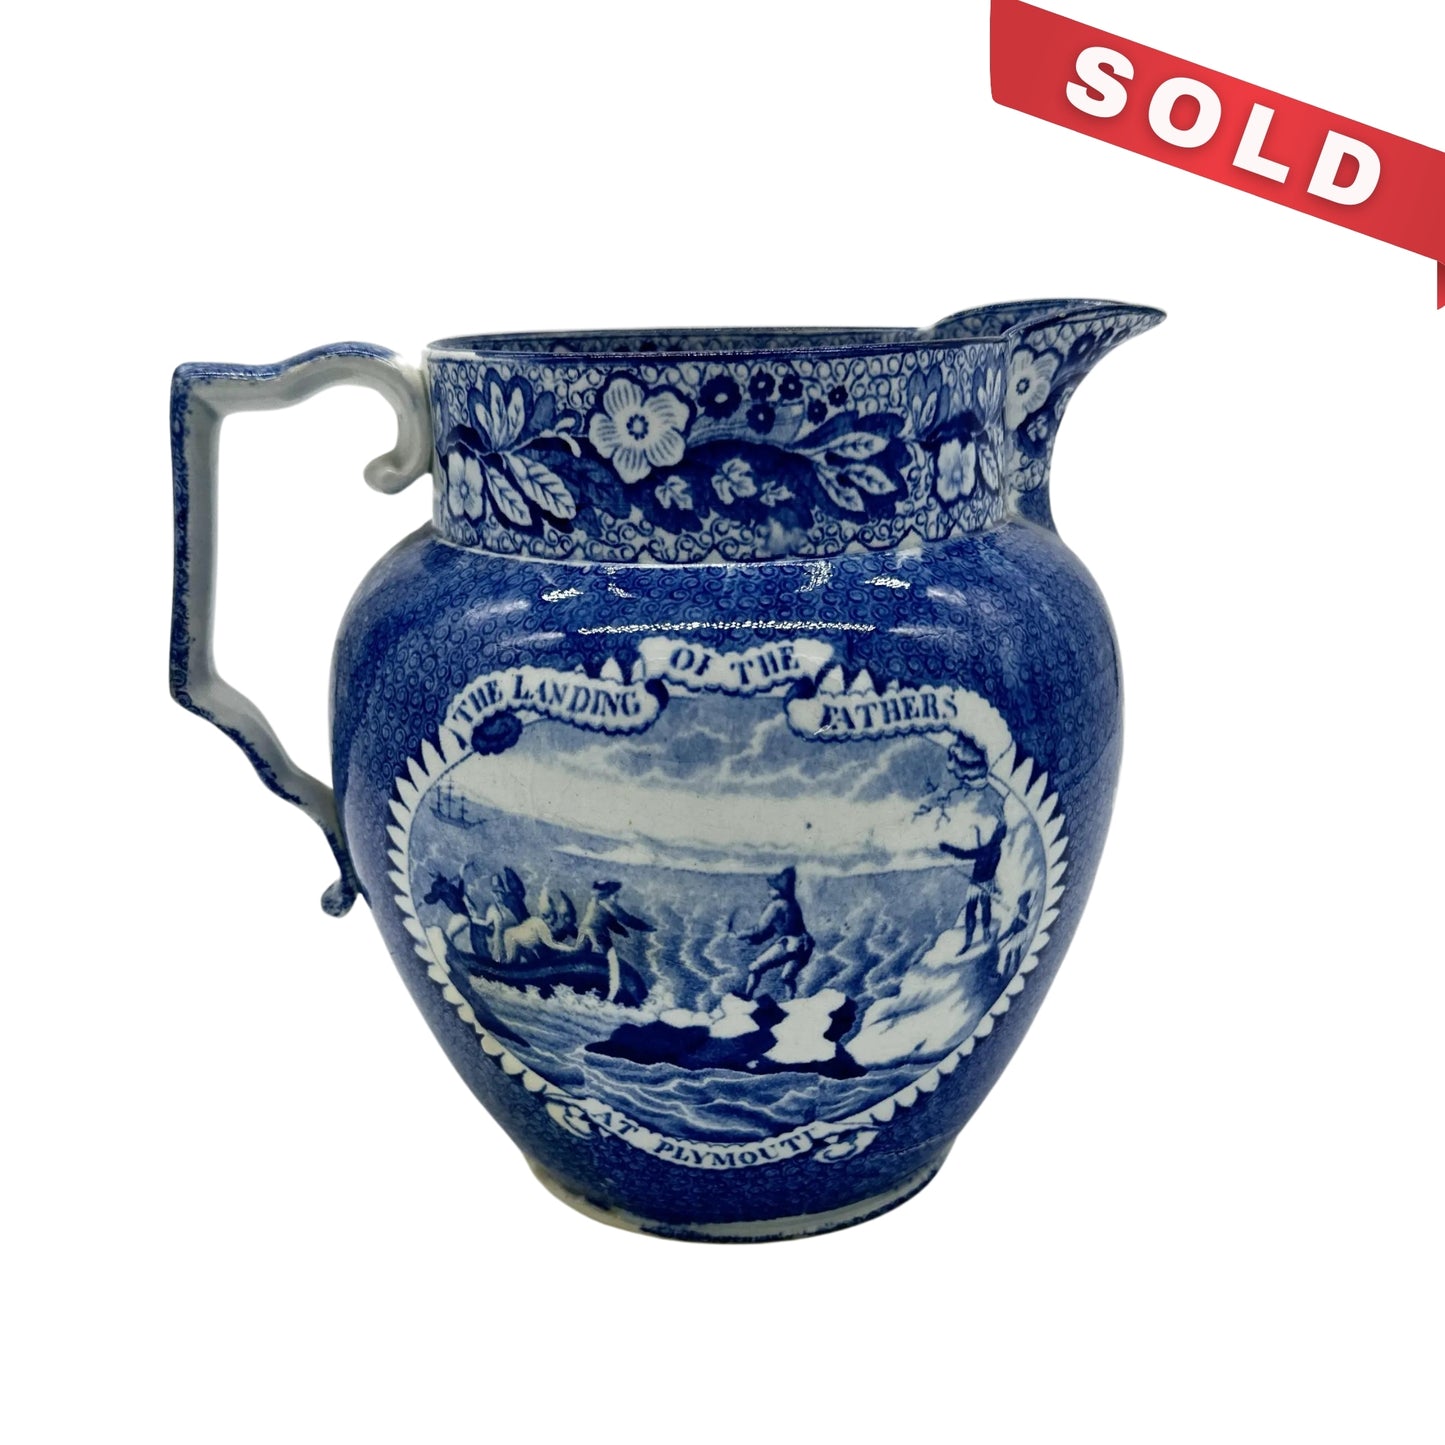 Historical Staffordshire "Landing of Fathers, Plymouth Rock" Pitcher